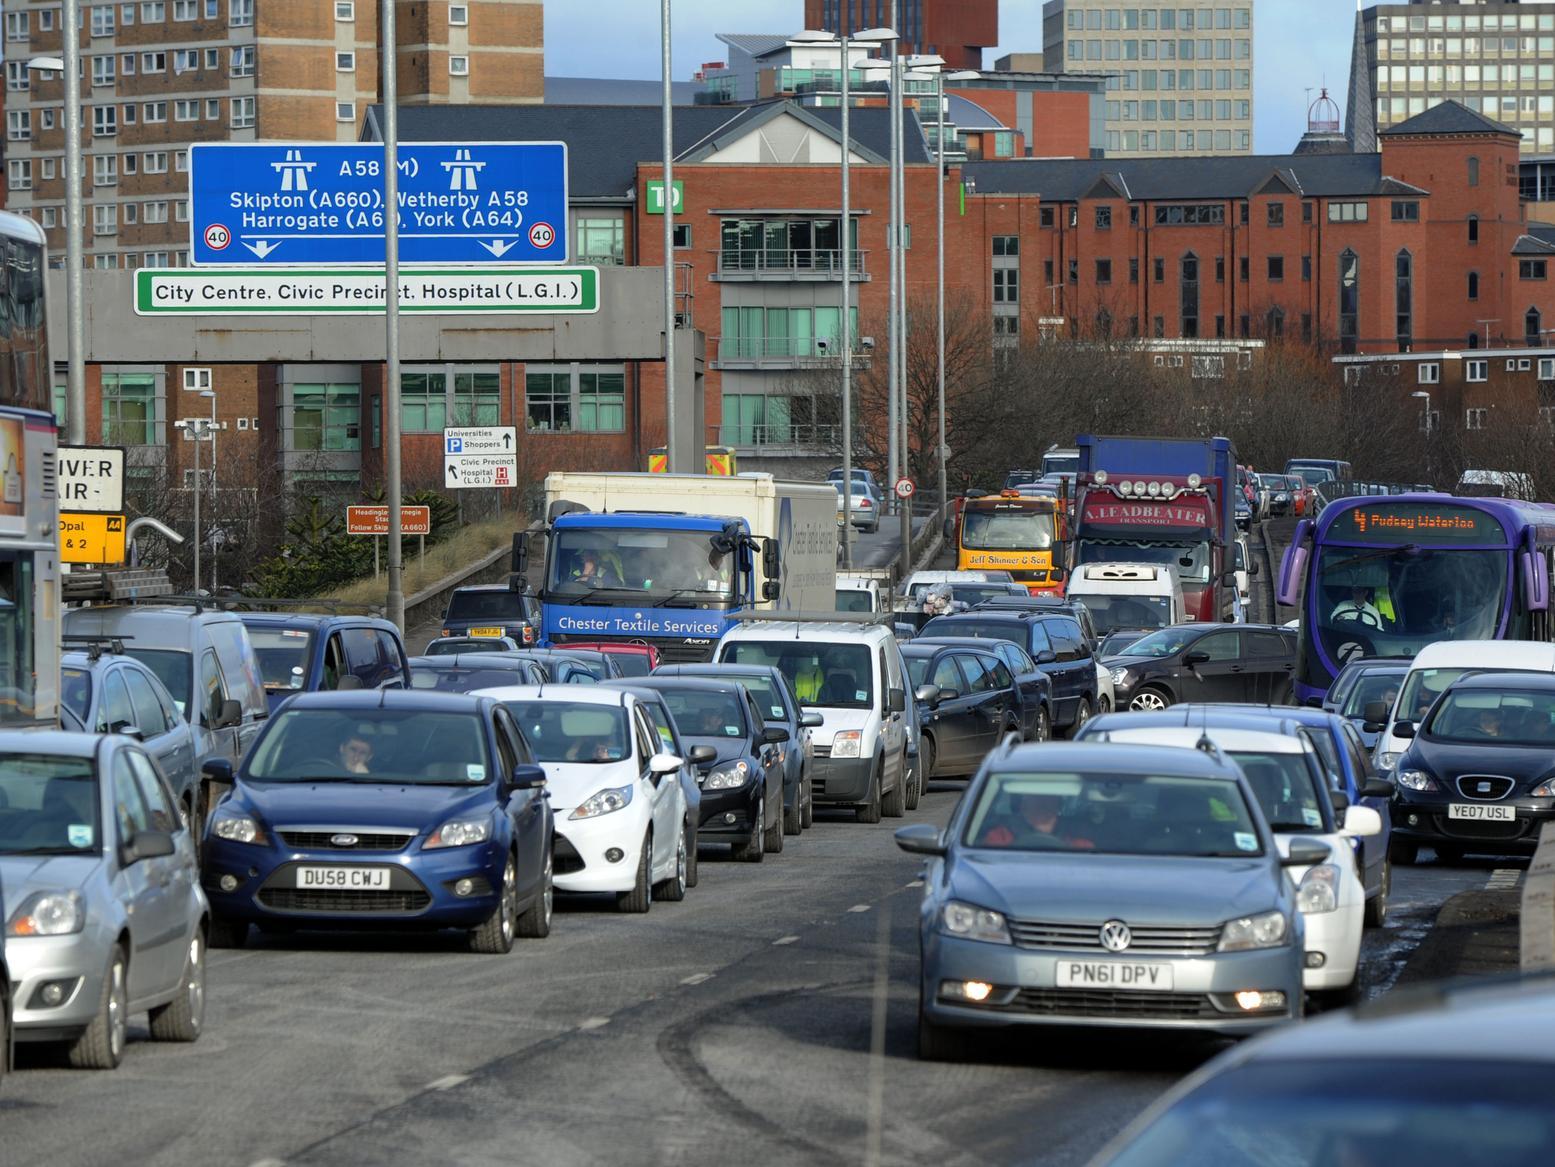 It may have taken more than 40 years to finish, having been hindered by delays since it was devised in the 1950s, but the road is frequently plagued by traffic delays, as many motorists will be familiar with.